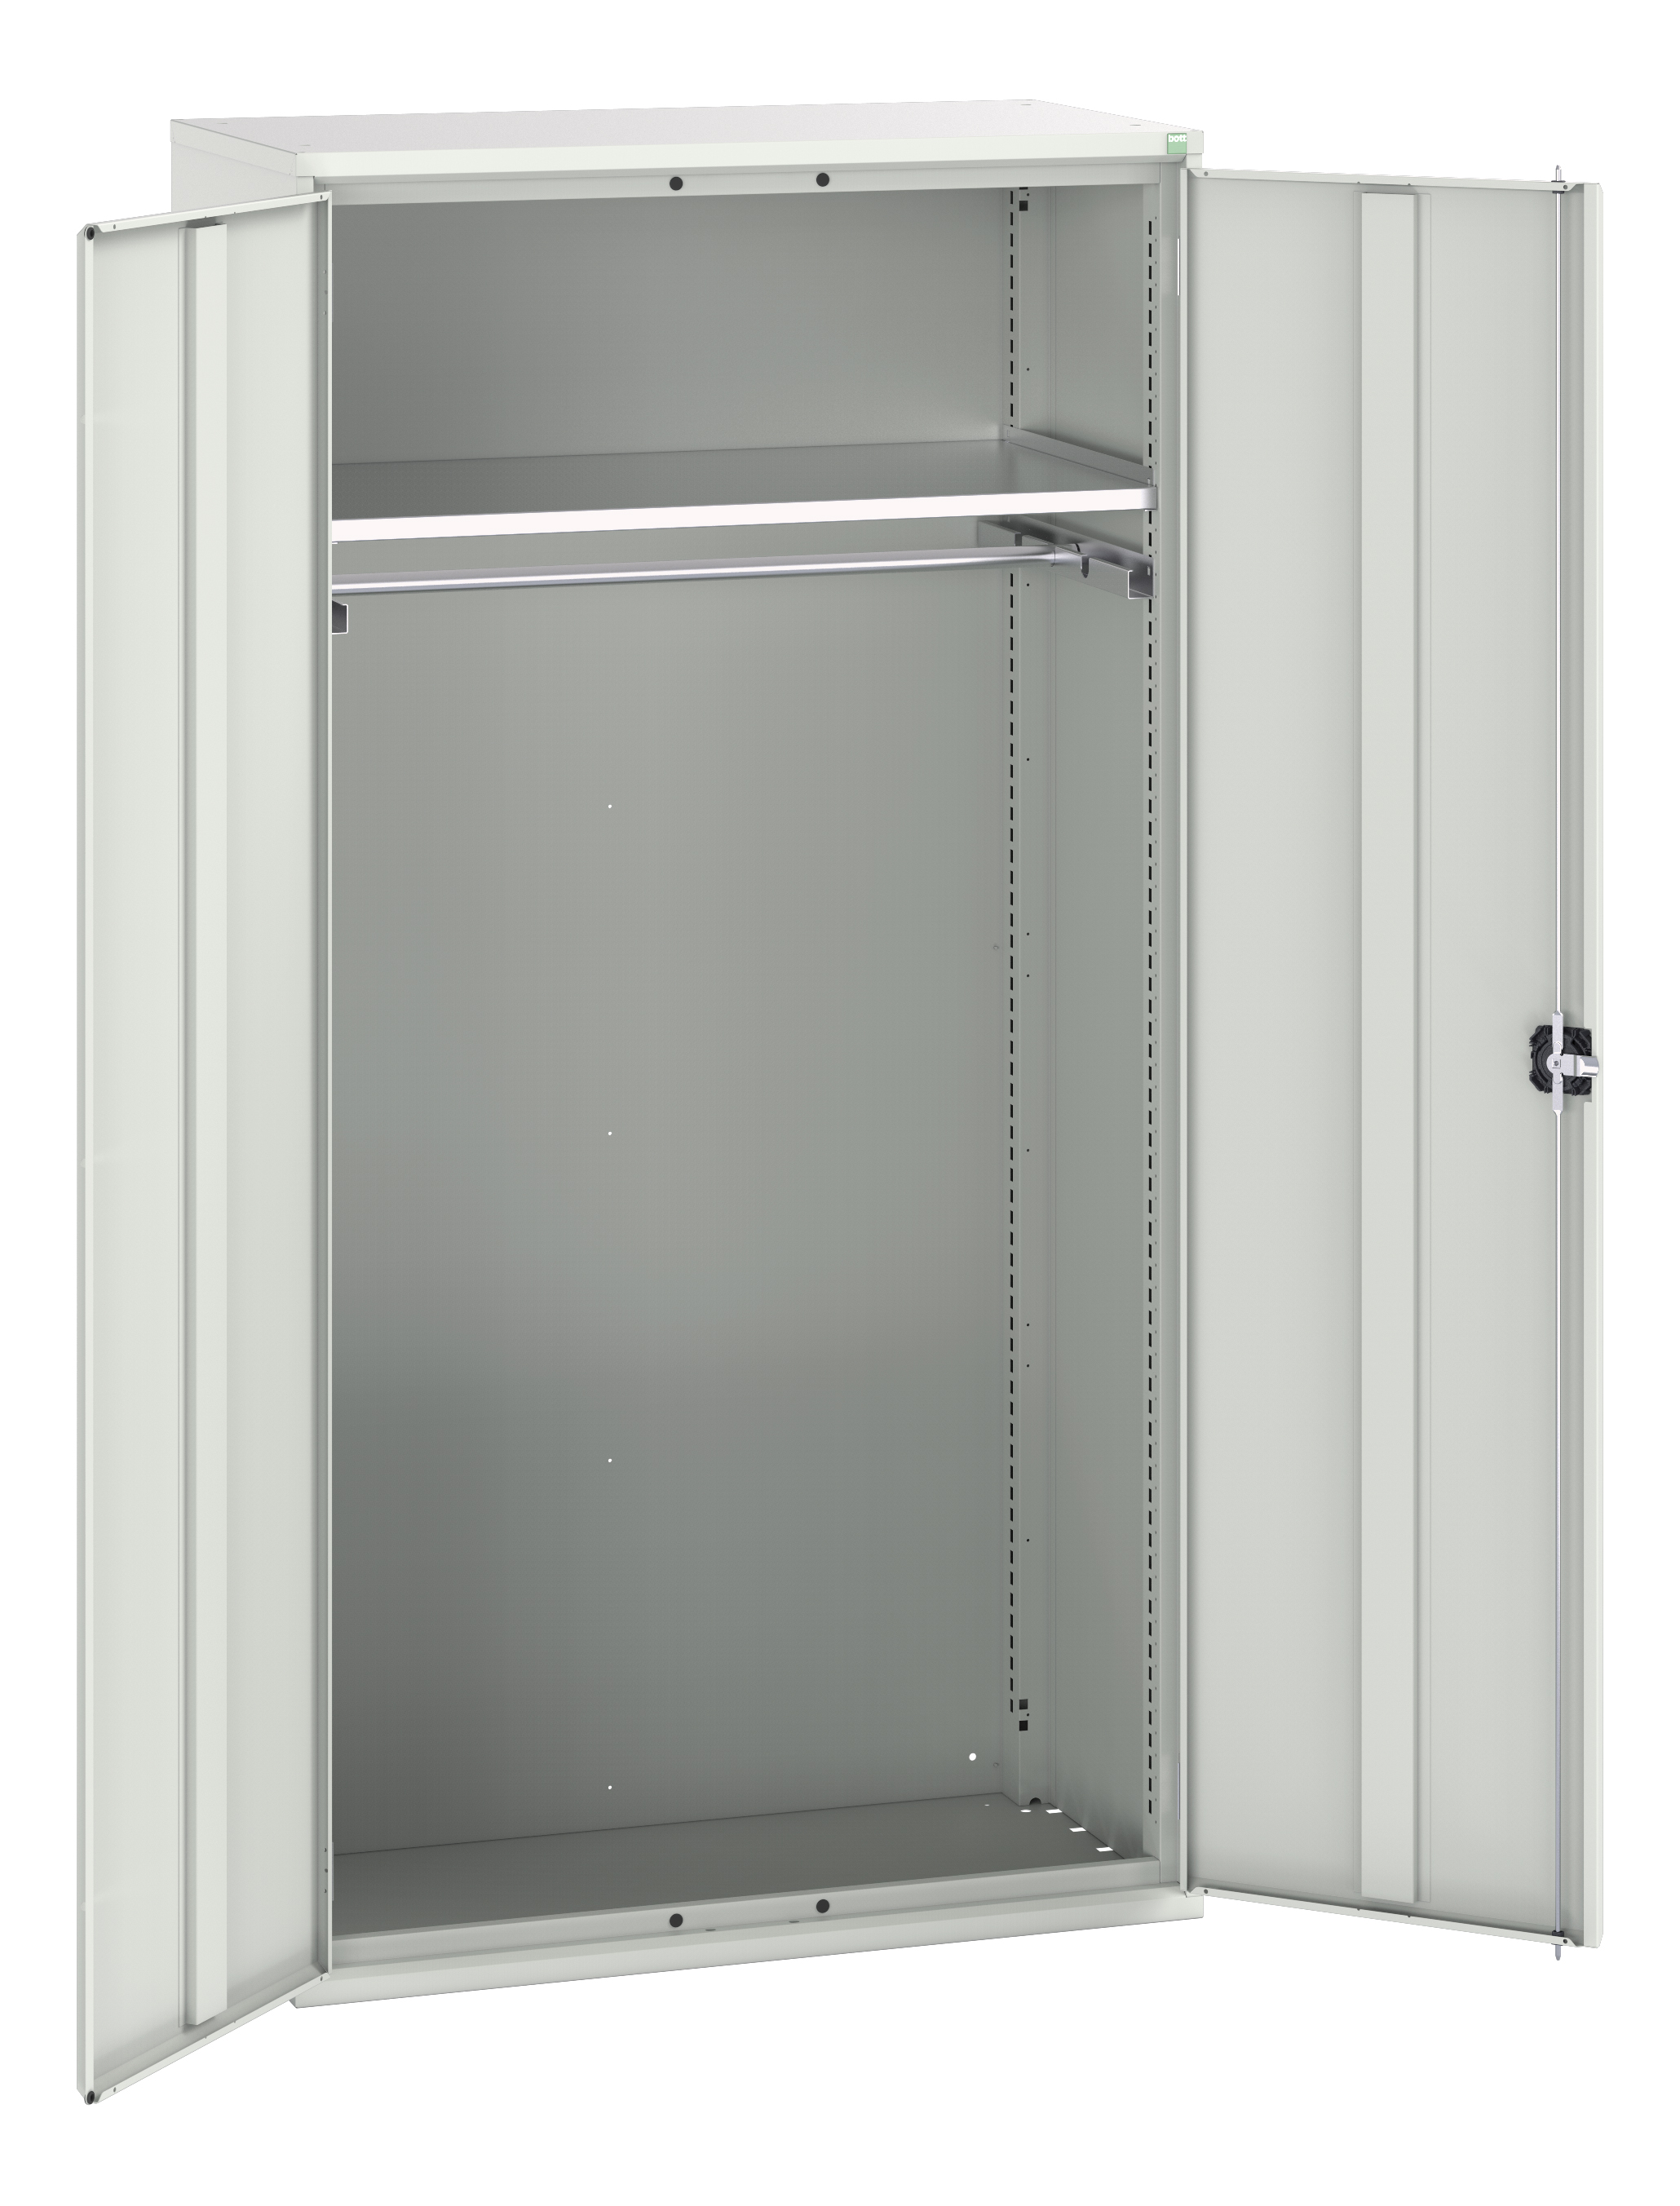 Bott Verso Ppe / Janitorial Kitted Cupboard - 16926584.16